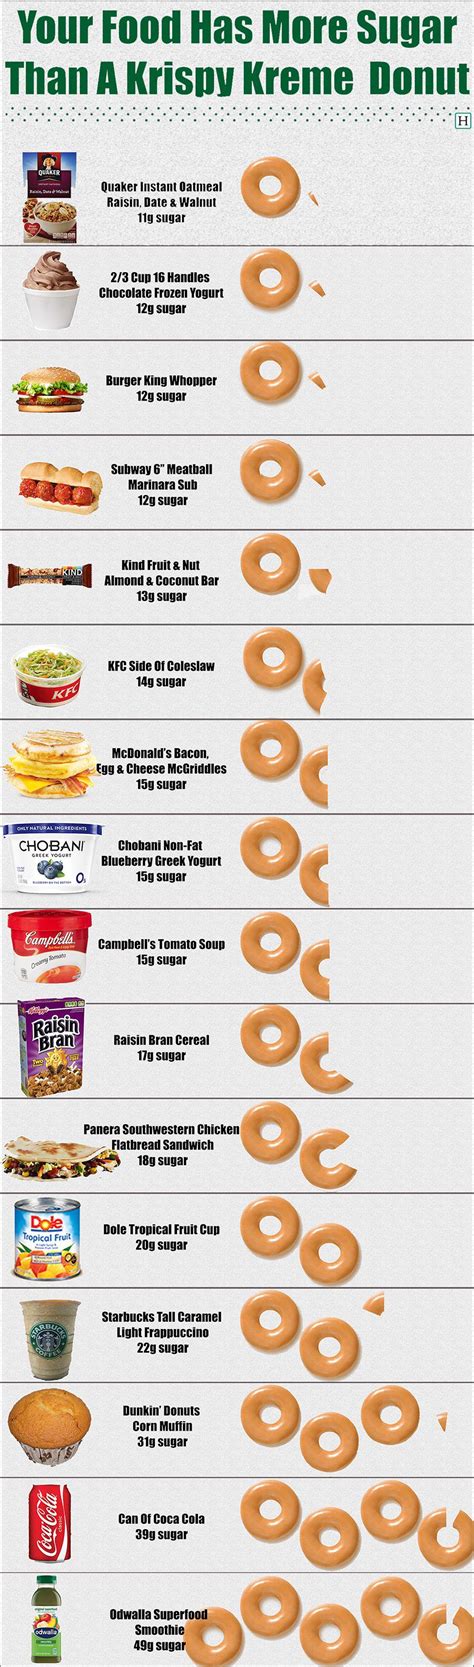 Sugar equivalent of donuts : r/coolguides